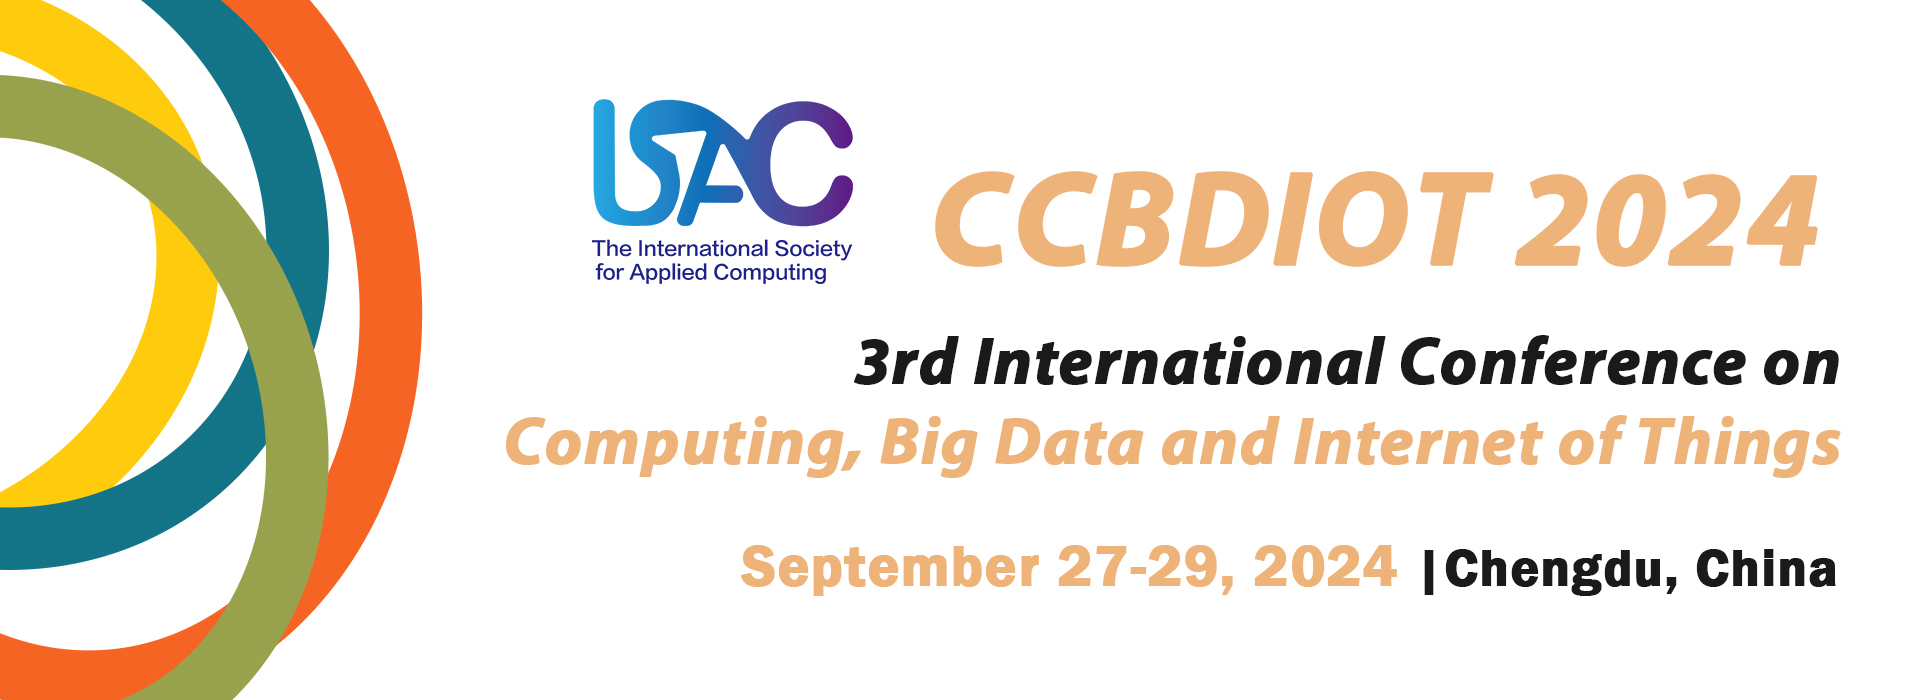 2024 3rd International Conference on Computing, Big Data and Internet of Things (CCBDIOT 2024), CHENGDU, Sichuan, China